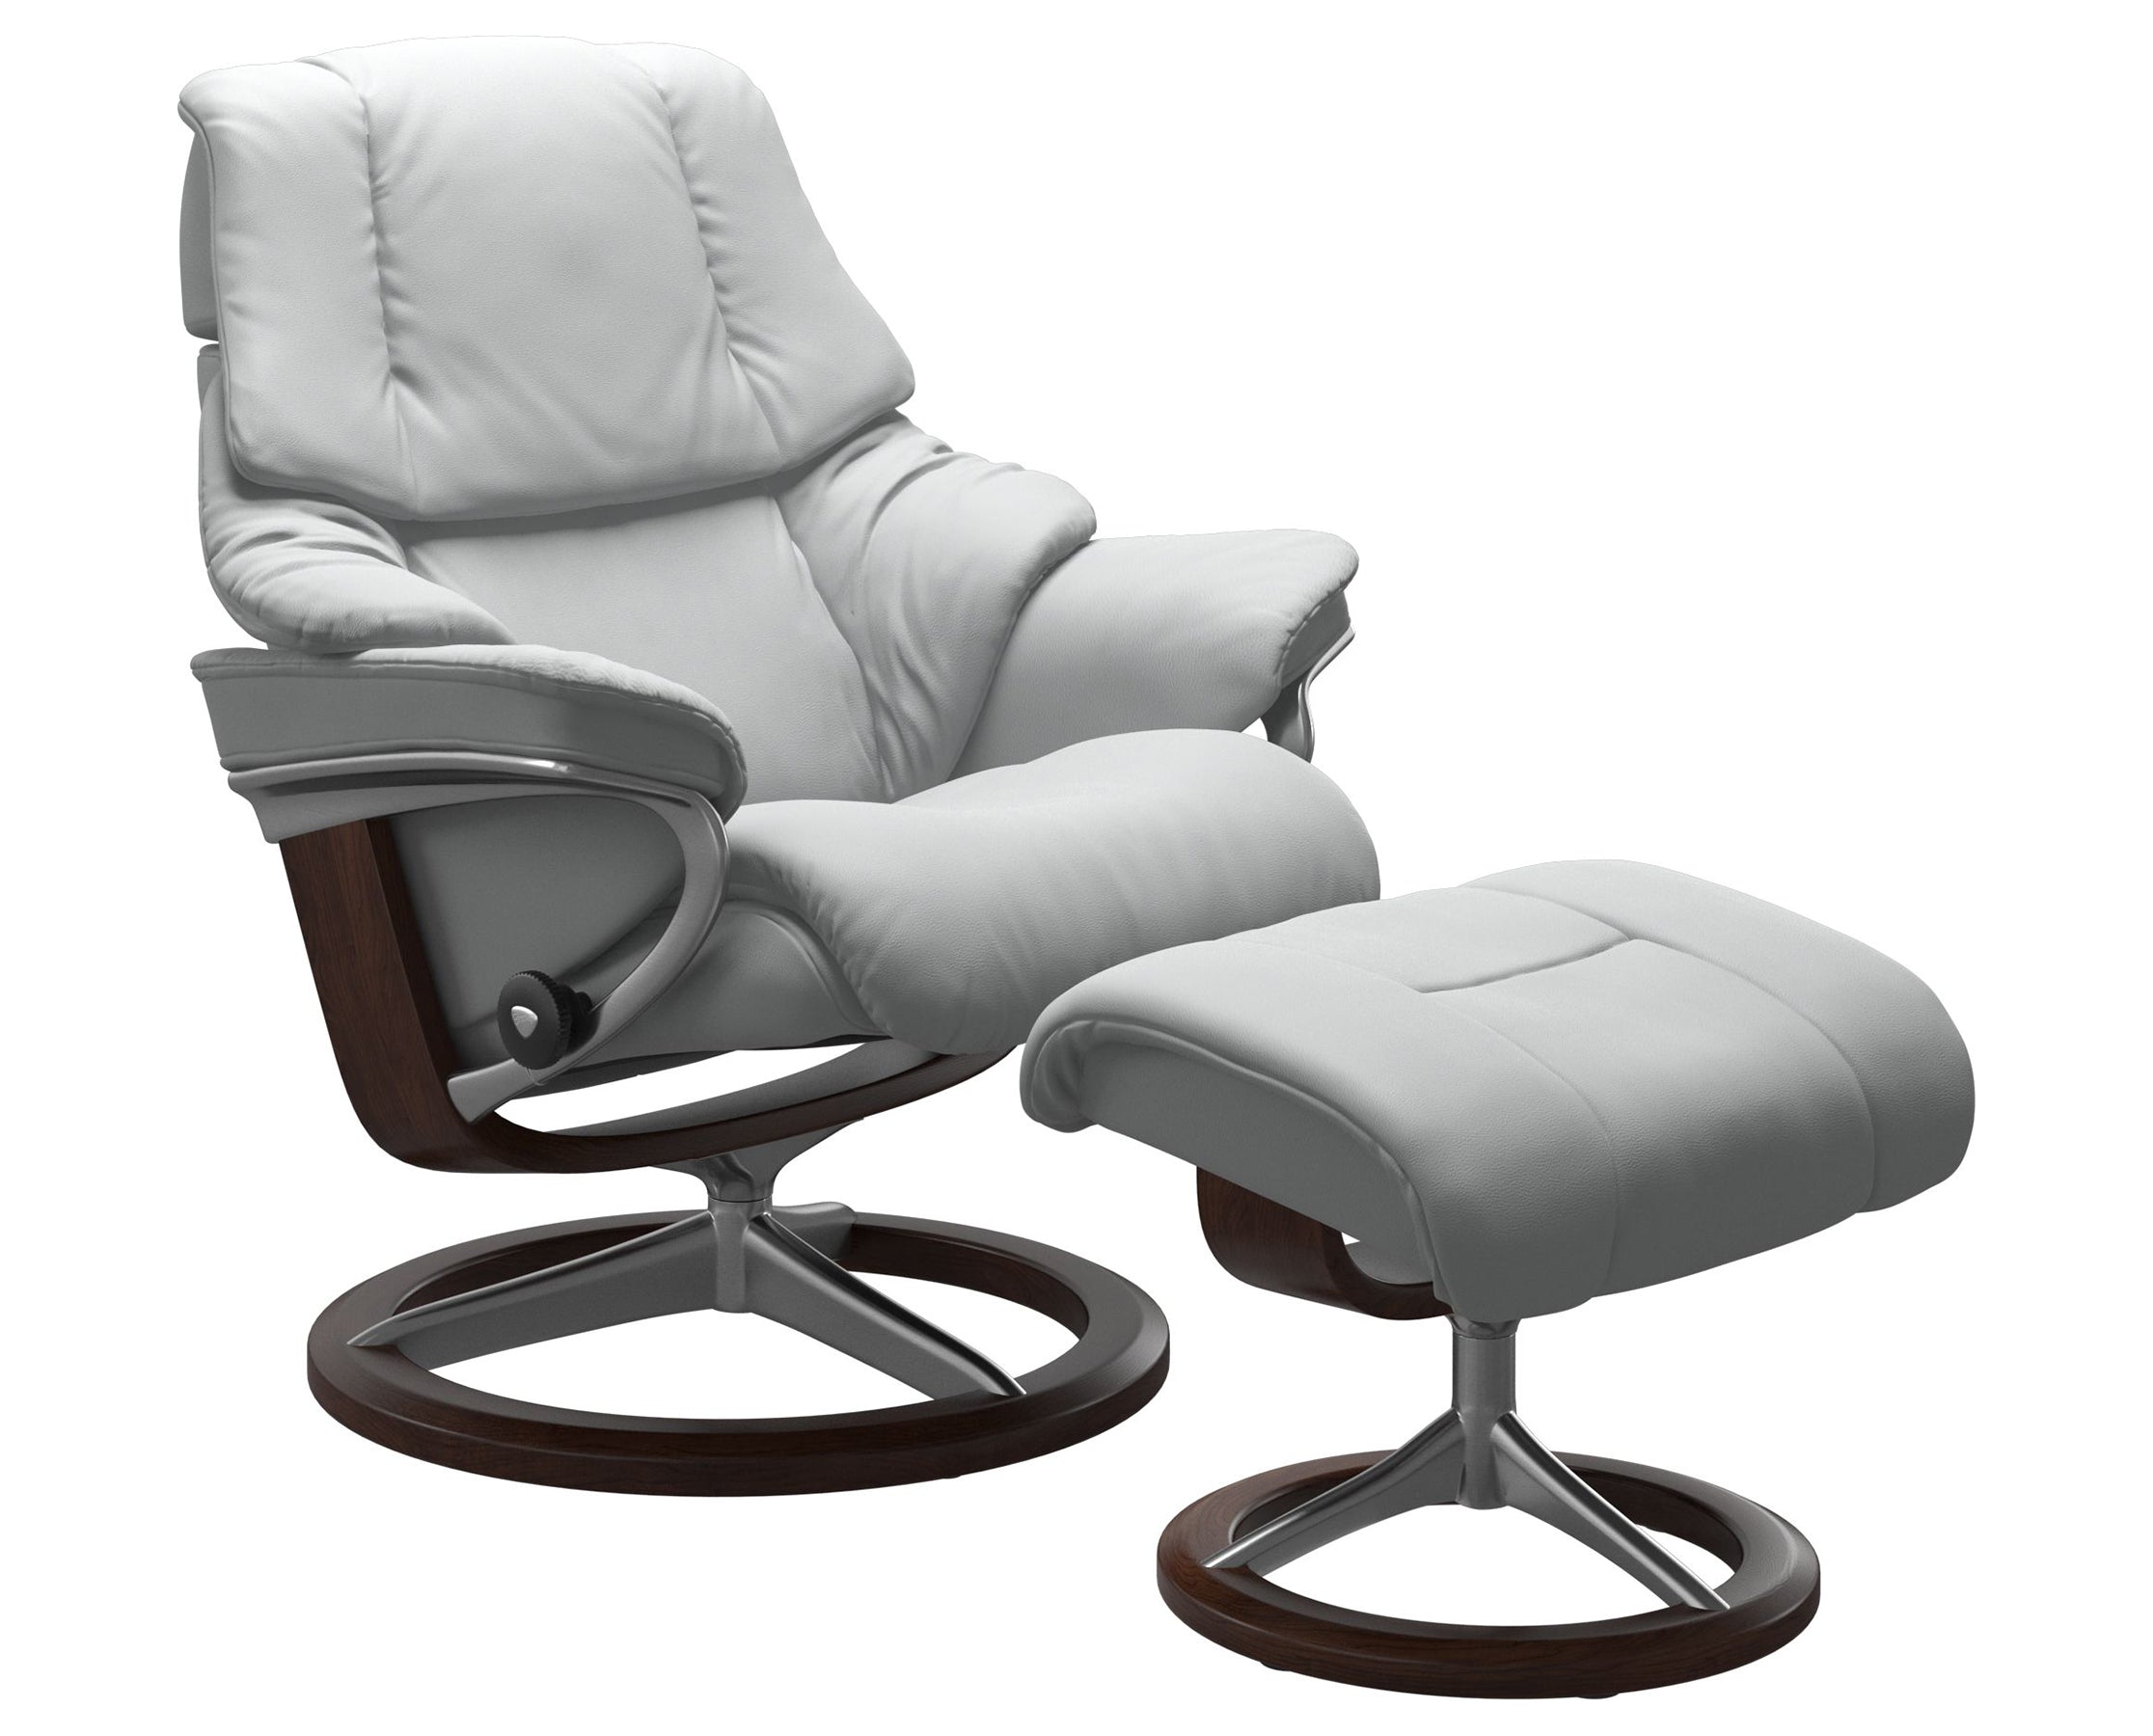 Paloma Leather Misty Grey S/M/L and Brown Base | Stressless Reno Signature Recliner | Valley Ridge Furniture